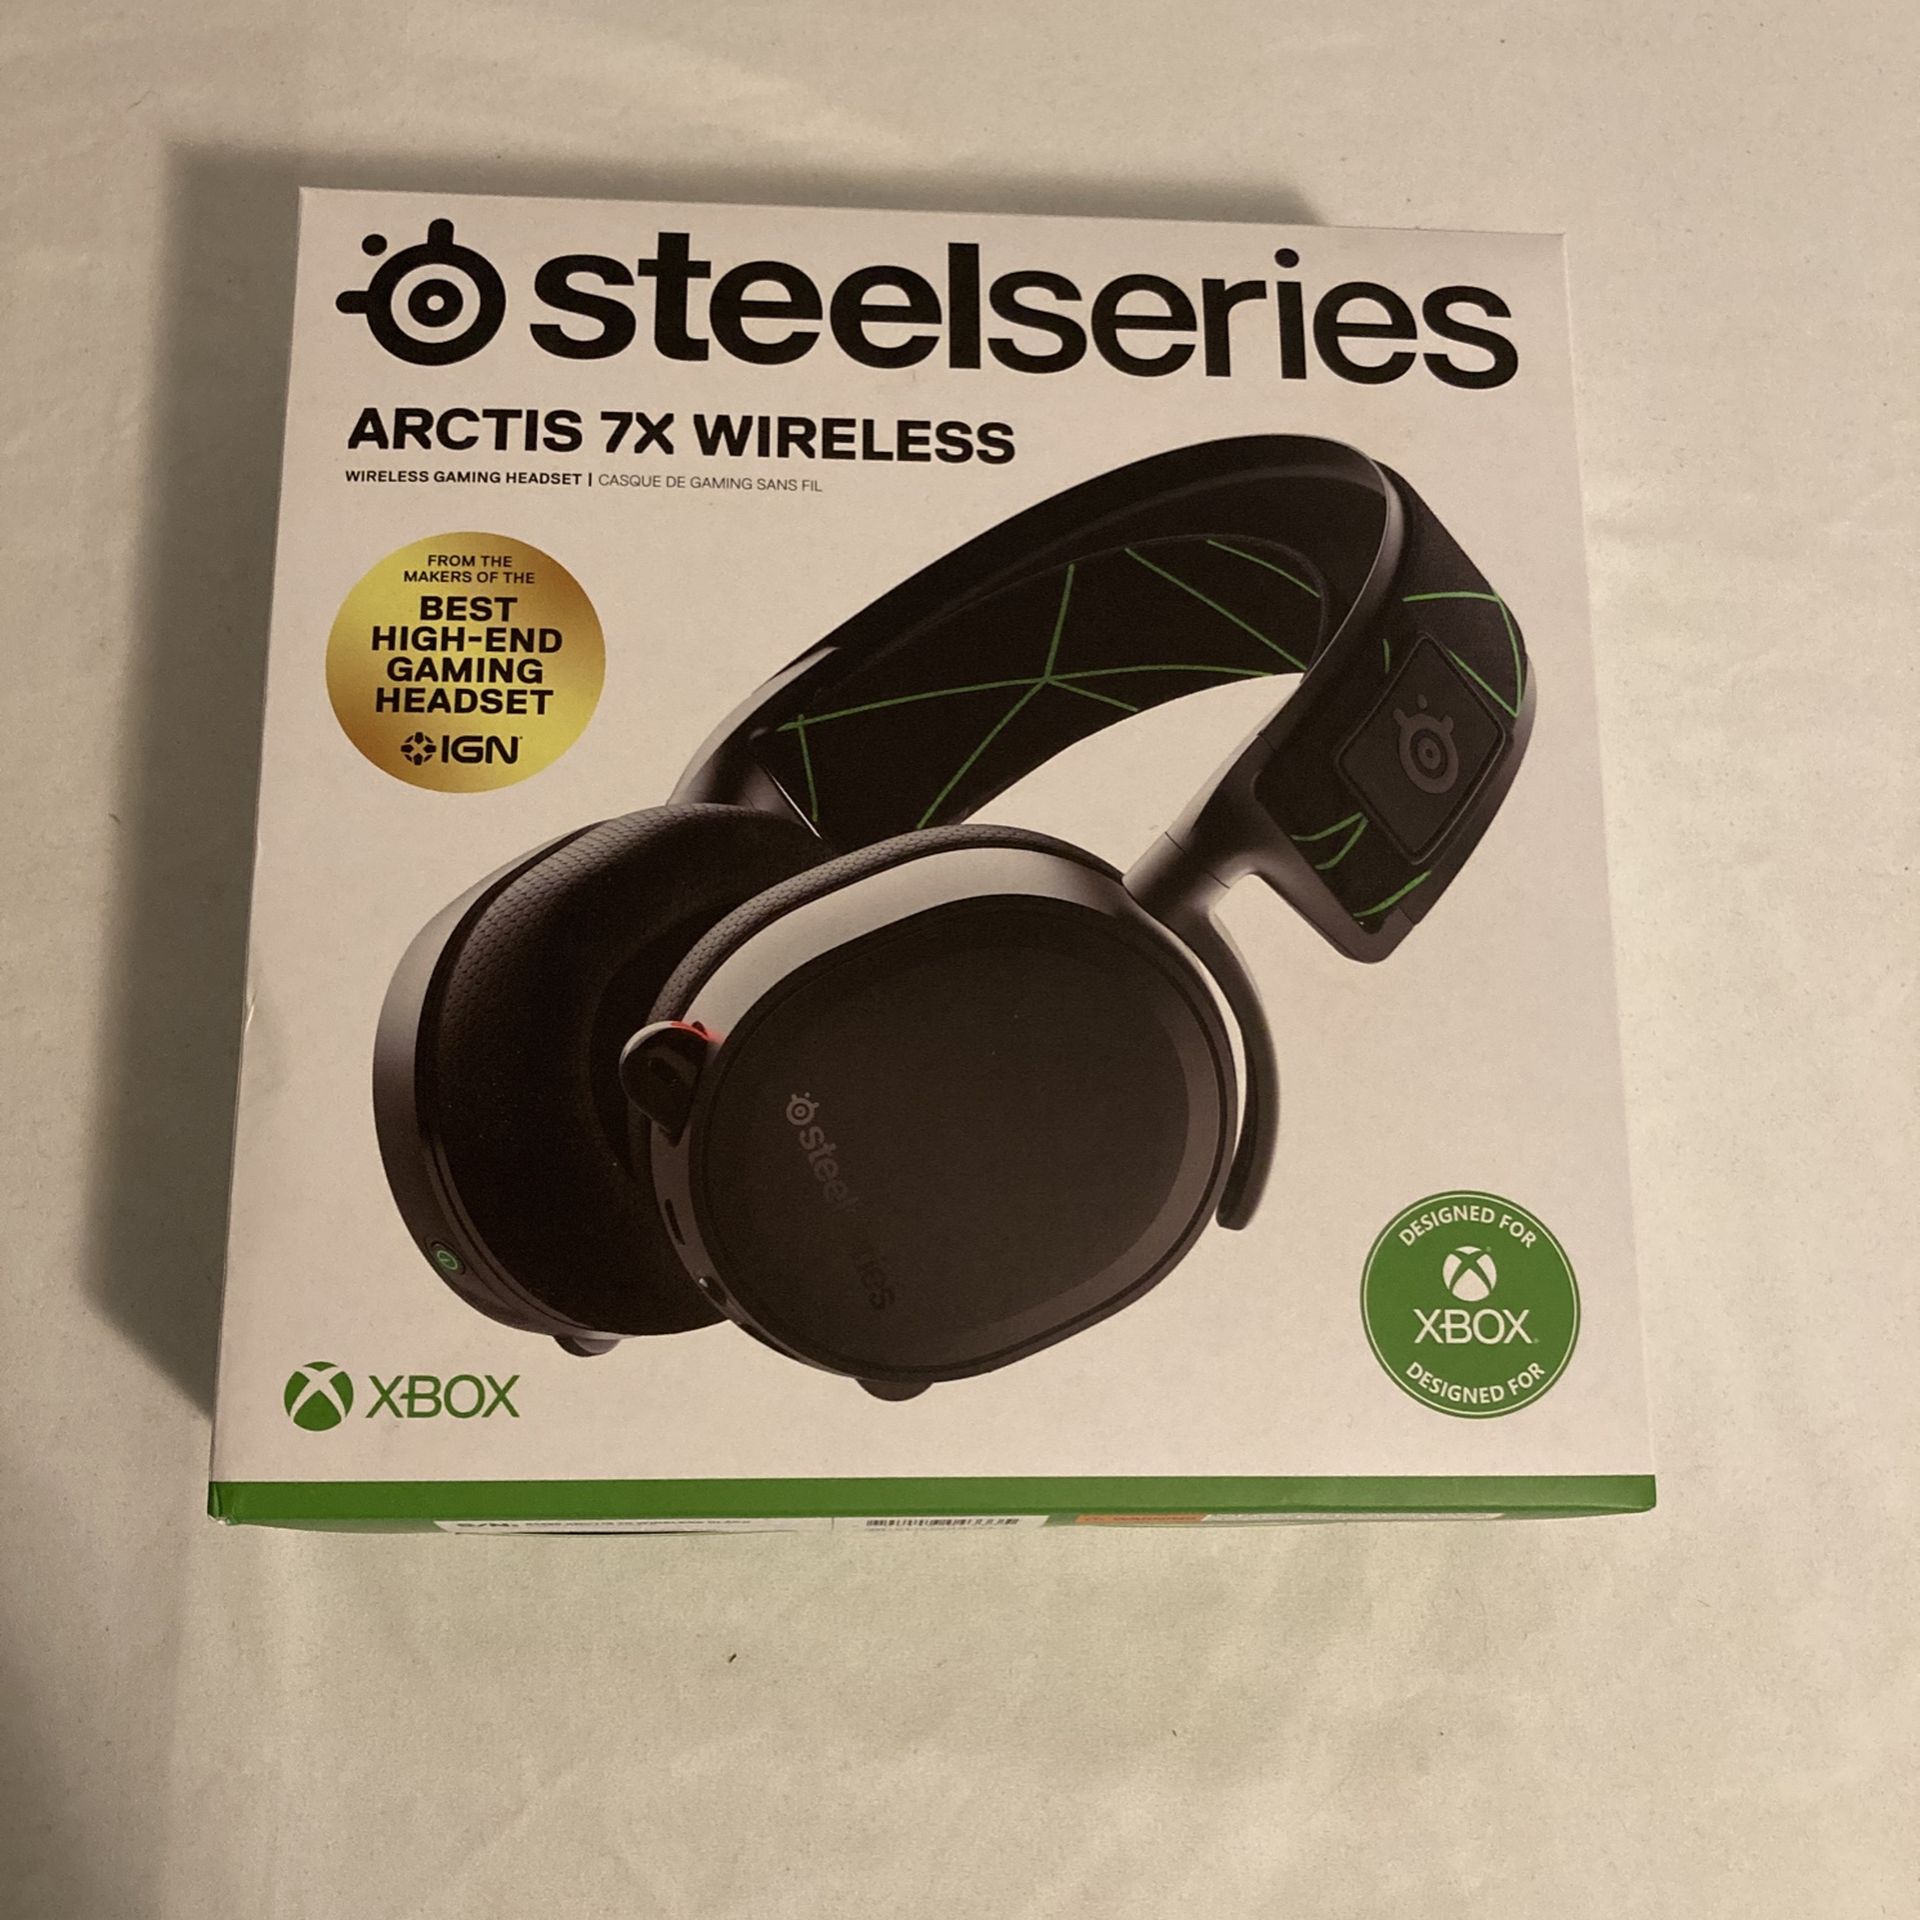 Steelseries Arctic 7x Wireless Gaming Headset